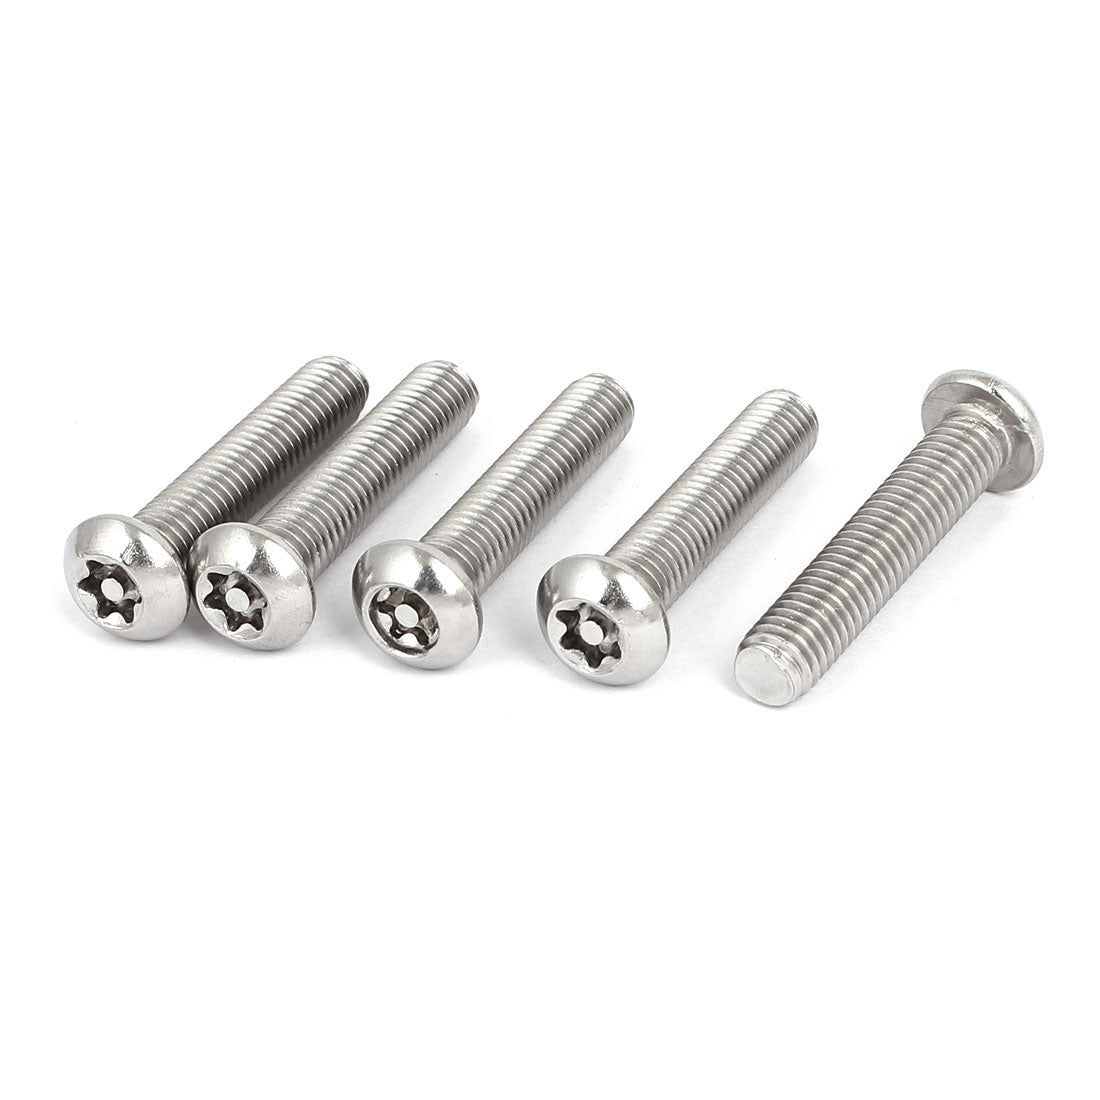 uxcell Uxcell M8x40mm 304 Stainless Steel Button Head Torx Security Machine Screws 5pcs